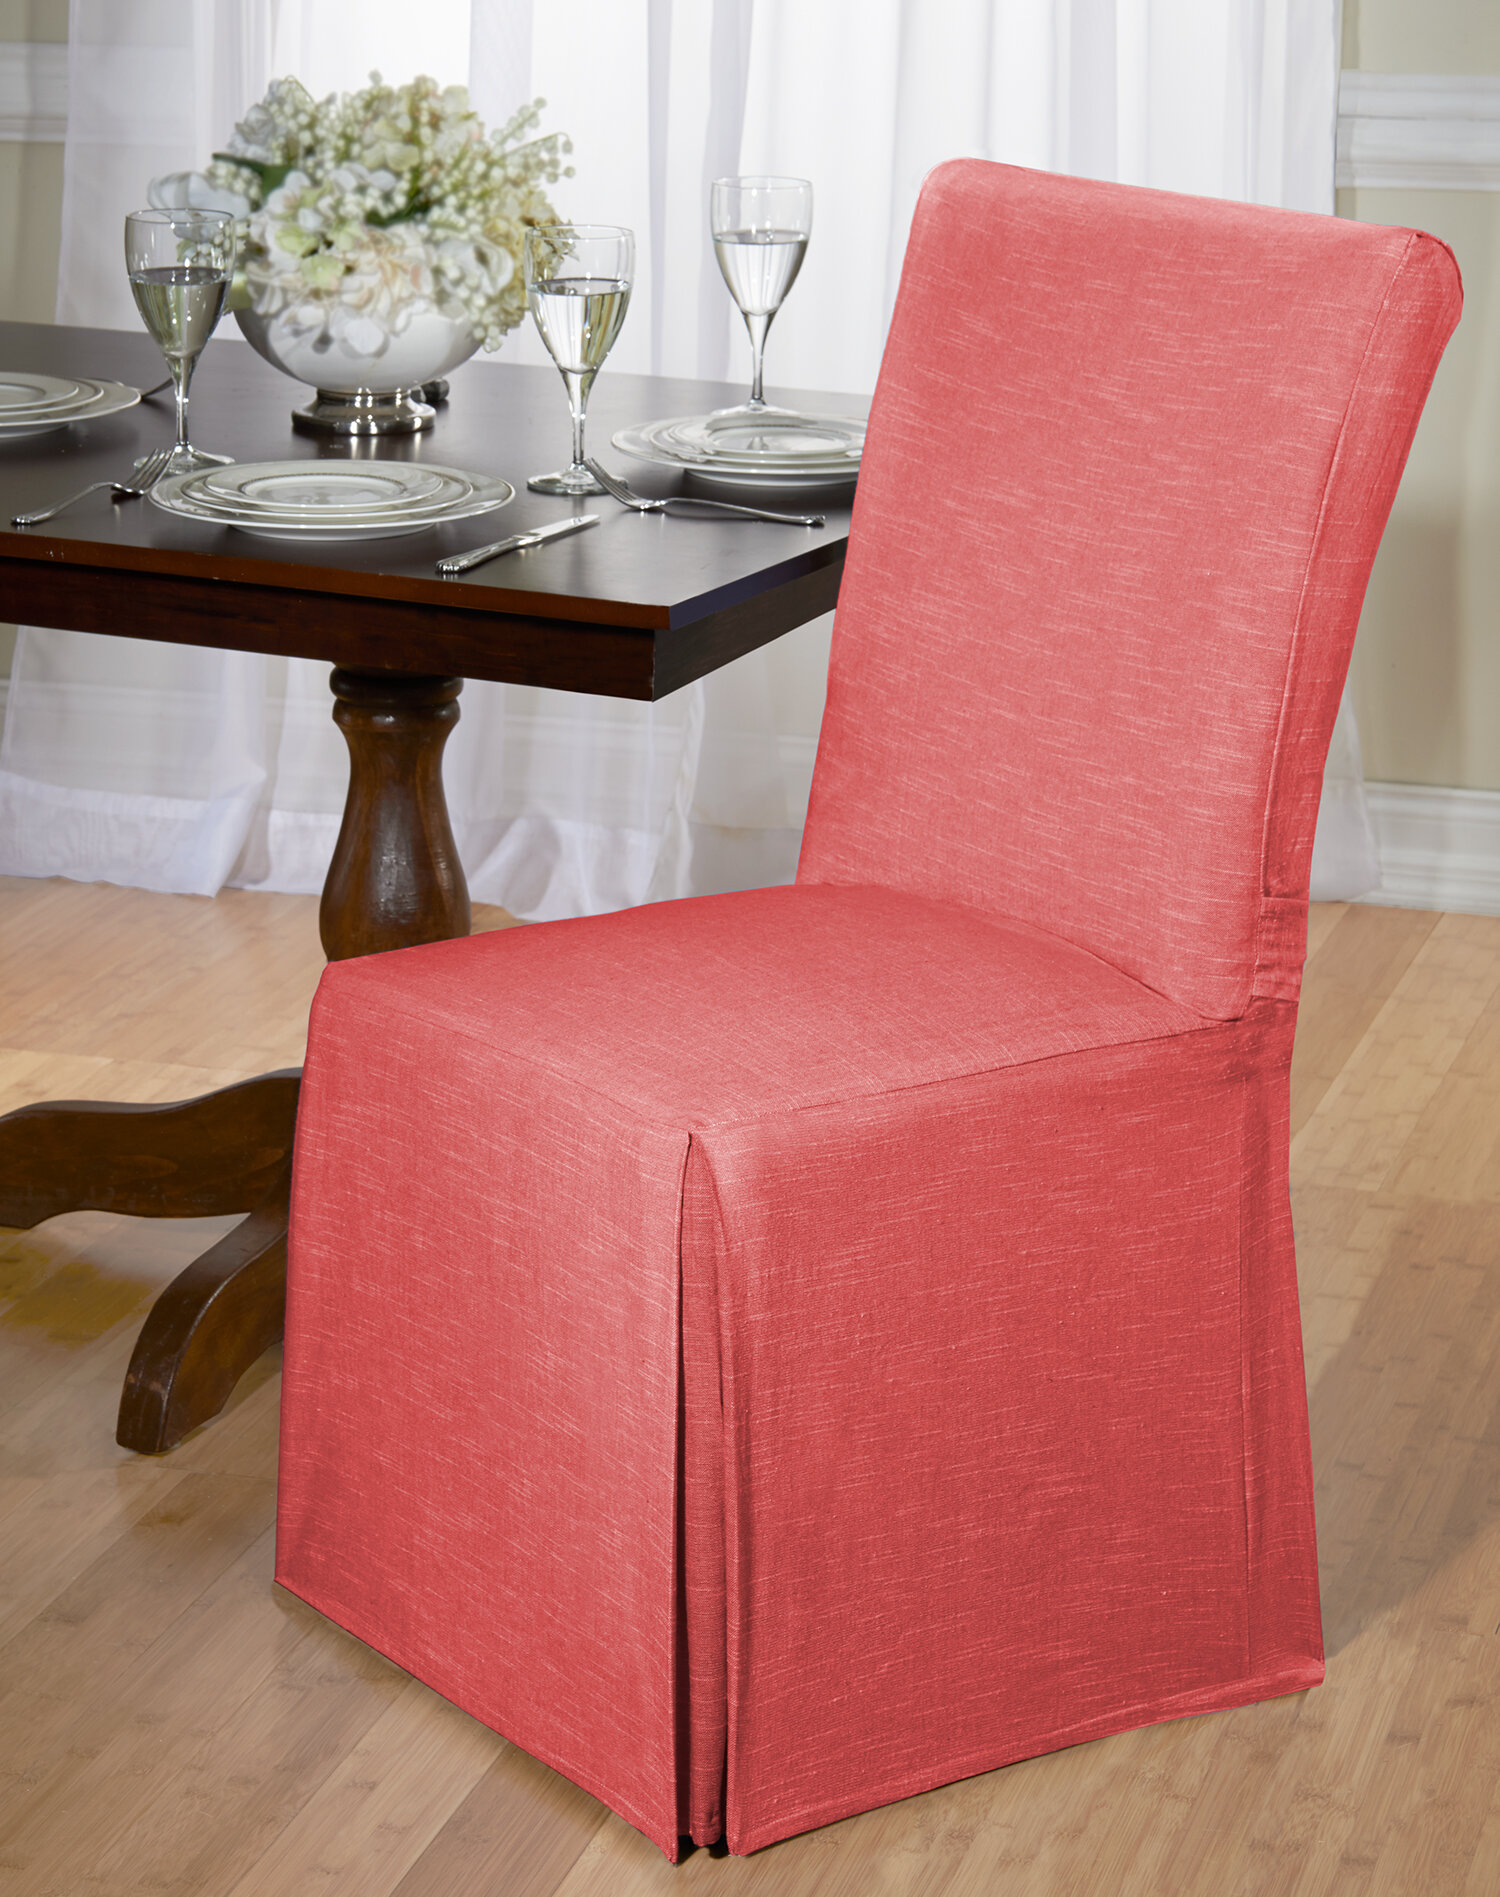 Wayfair | Kitchen & Dining Chair Covers